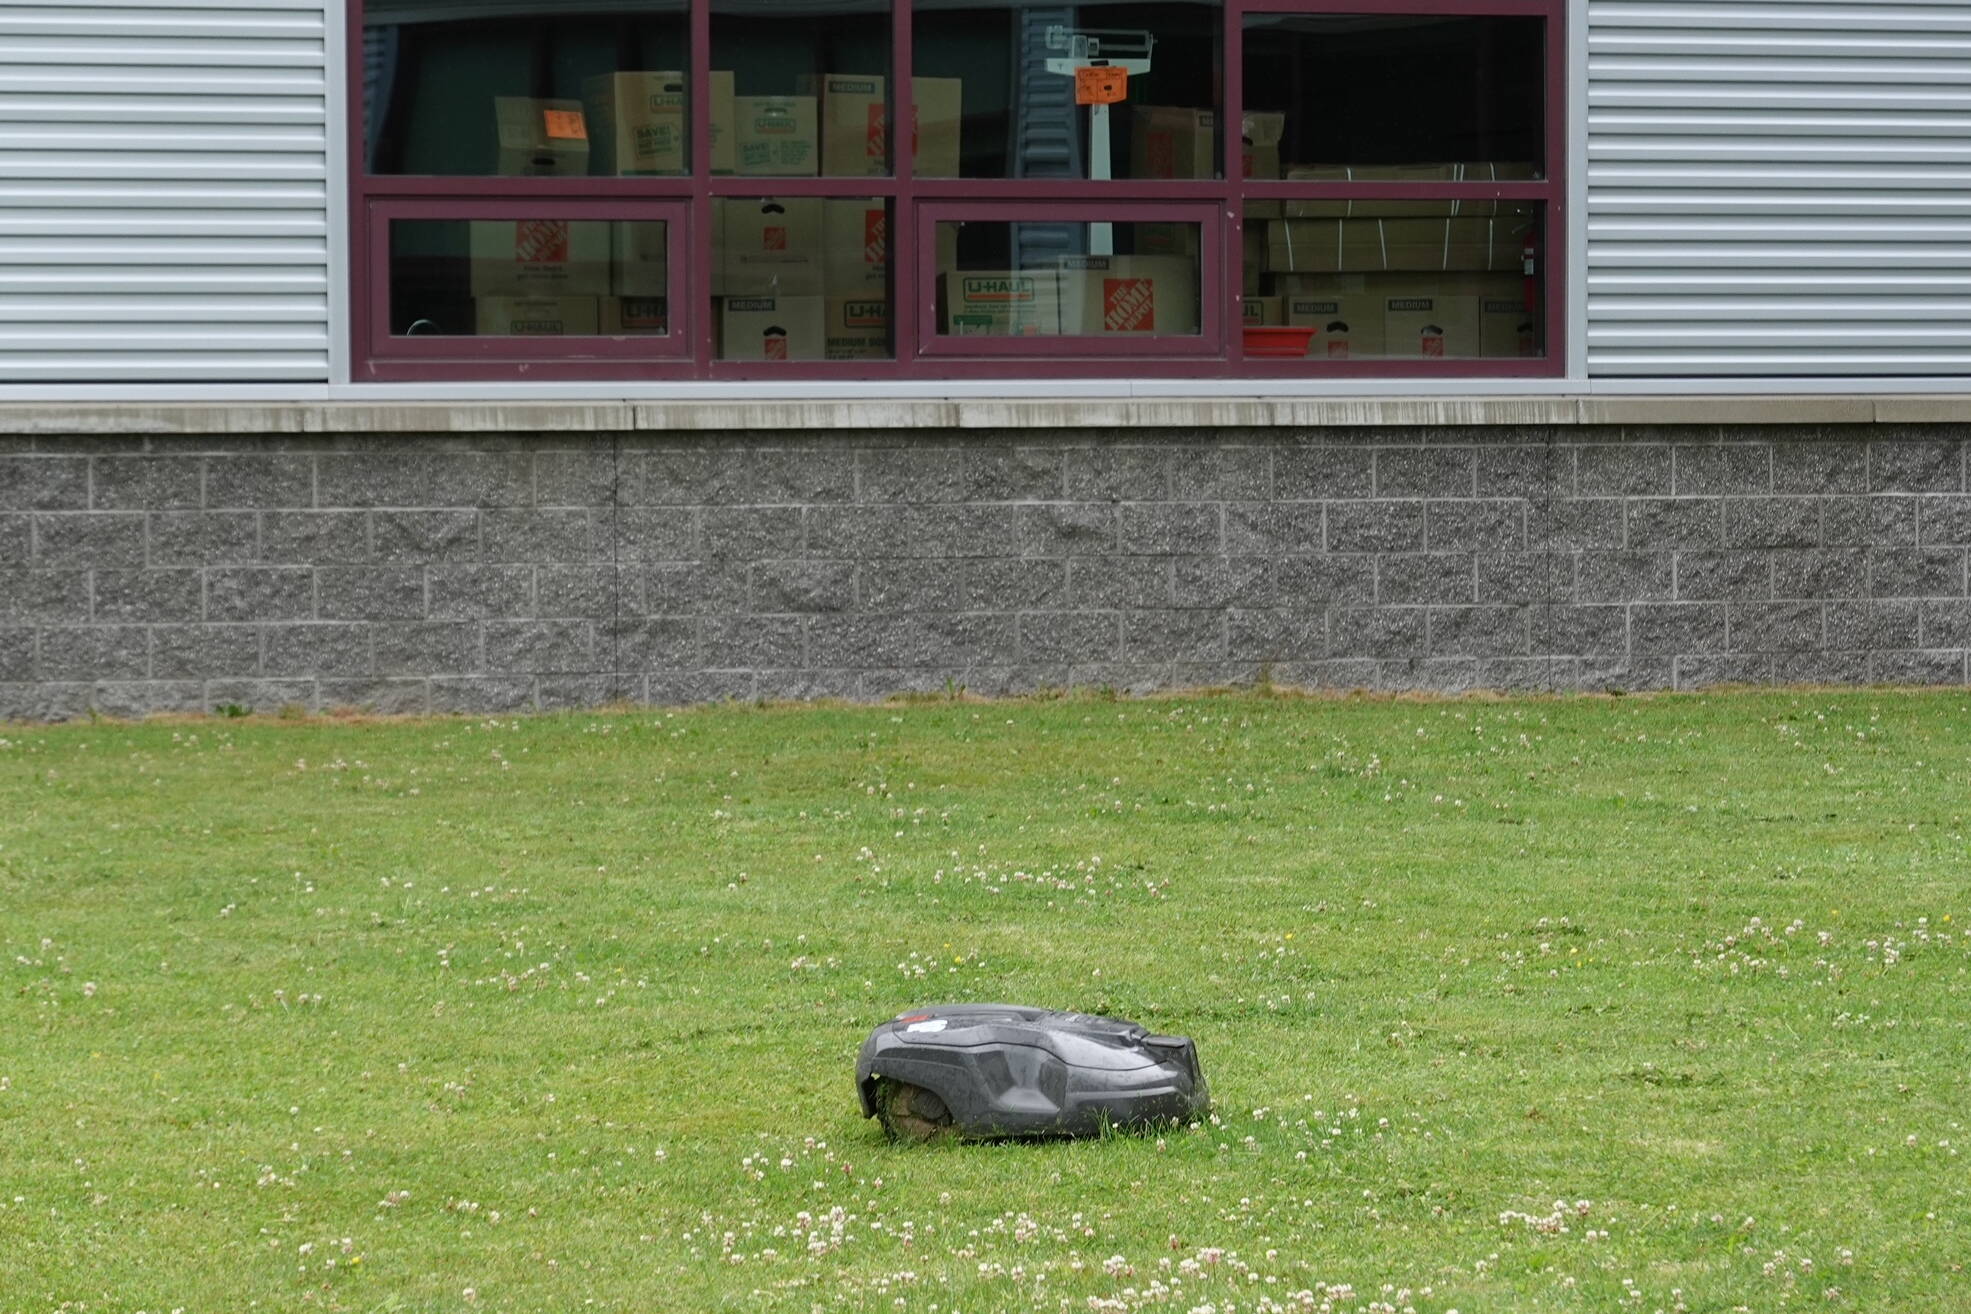 Looking like a gray turtle, an automated mower cuts grass in front of Thunder Mountain Middle School with boxes stacked in a classroom window beyond. (Laurie Craig / Juneau Empire)